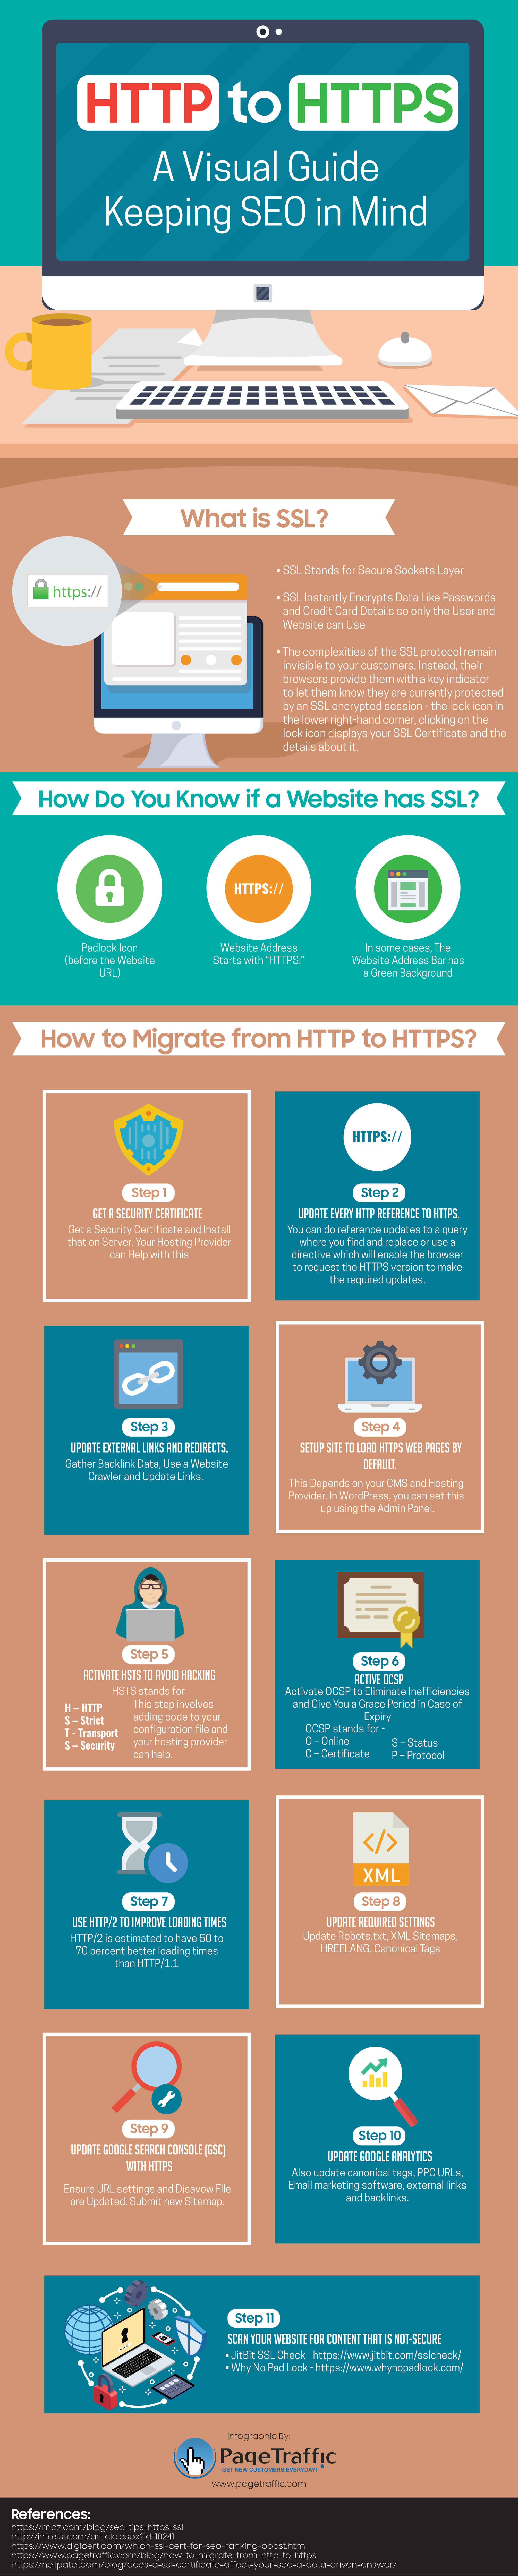 HTTP to HTTPS A Visual Guide Keeping SEO in Mind